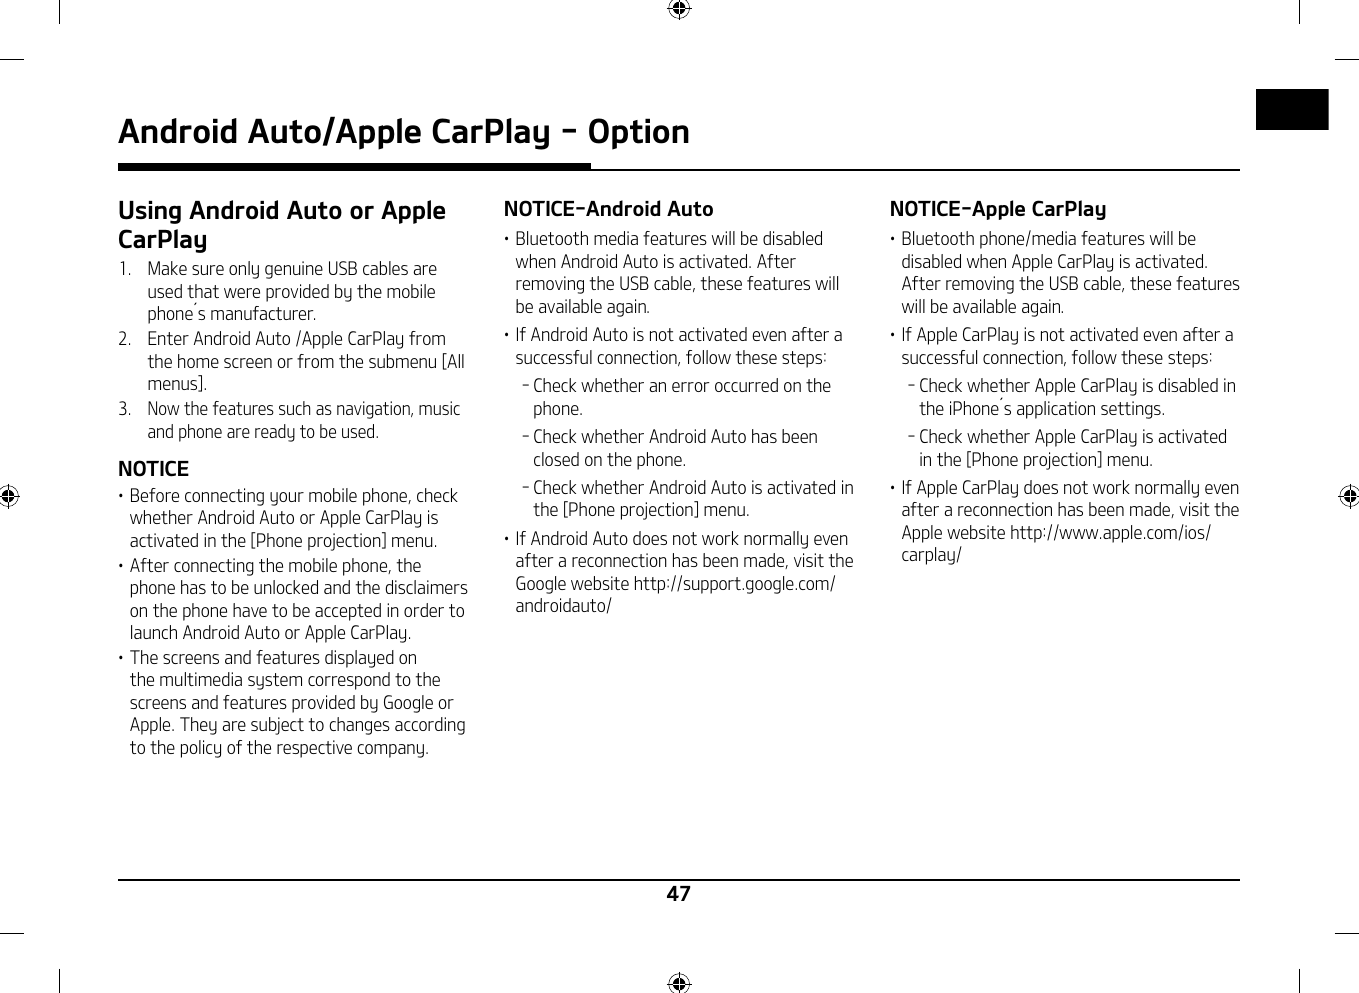 47Android Auto/Apple CarPlay - OptionUsing Android Auto or Apple CarPlay1.   Make sure only genuine USB cables are used that were provided by the mobile phone󲷿s manufacturer.2.   Enter Android Auto /Apple CarPlay from the home screen or from the submenu [All menus].3.  Now the features such as navigation, music and phone are ready to be used.NOTICE䳜 Before connecting your mobile phone, check whether Android Auto or Apple CarPlay is activated in the [Phone projection] menu.䳜 After connecting the mobile phone, the phone has to be unlocked and the disclaimers on the phone have to be accepted in order to launch Android Auto or Apple CarPlay.䳜 The screens and features displayed on the multimedia system correspond to the screens and features provided by Google or Apple. They are subject to changes according to the policy of the respective company.NOTICE-Android Auto䳜 Bluetooth media features will be disabled when Android Auto is activated. After removing the USB cable, these features will be available again.䳜 If Android Auto is not activated even after a successful connection, follow these steps: - Check whether an error occurred on the phone. - Check whether Android Auto has been closed on the phone. - Check whether Android Auto is activated in the [Phone projection] menu.䳜 If Android Auto does not work normally even after a reconnection has been made, visit the Google website http://support.google.com/androidauto/NOTICE-Apple CarPlay䳜 Bluetooth phone/media features will be disabled when Apple CarPlay is activated. After removing the USB cable, these features will be available again.䳜 If Apple CarPlay is not activated even after a successful connection, follow these steps: - Check whether Apple CarPlay is disabled in the iPhone󲷿s application settings. - Check whether Apple CarPlay is activated in the [Phone projection] menu.䳜 If Apple CarPlay does not work normally even after a reconnection has been made, visit the Apple website http://www.apple.com/ios/carplay/